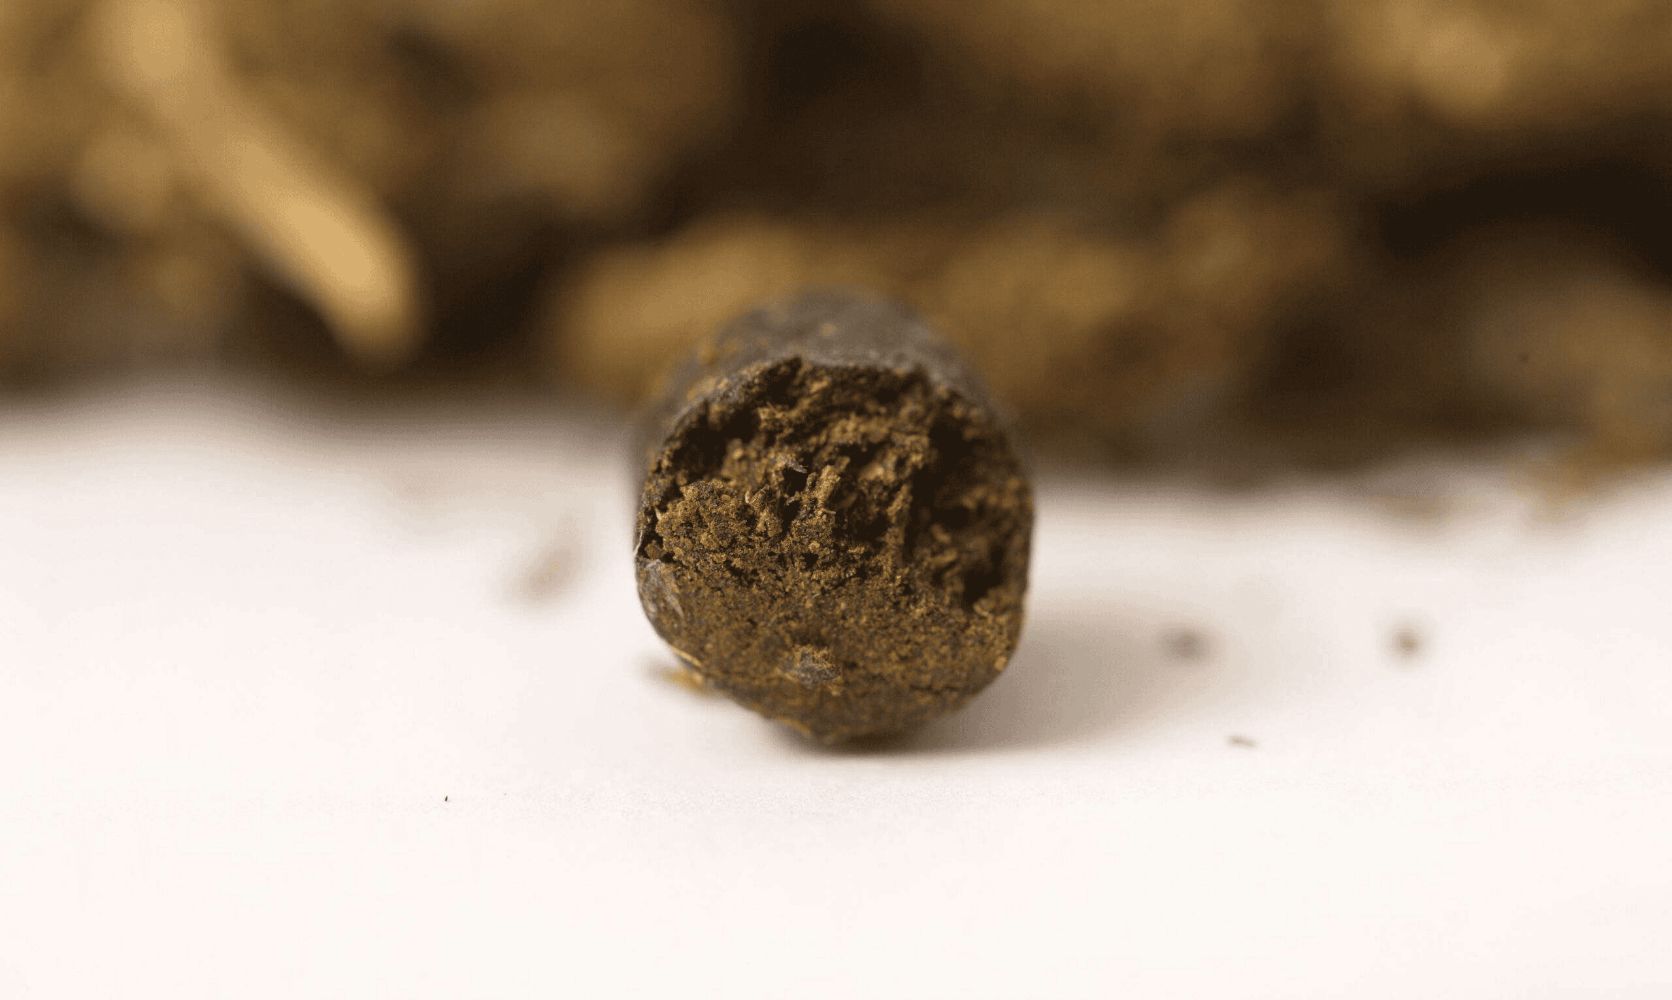 Mail order hash in Canada is high-quality, effective & inexpensive. Find out where to buy premium hash online! This updated guide reveals all!